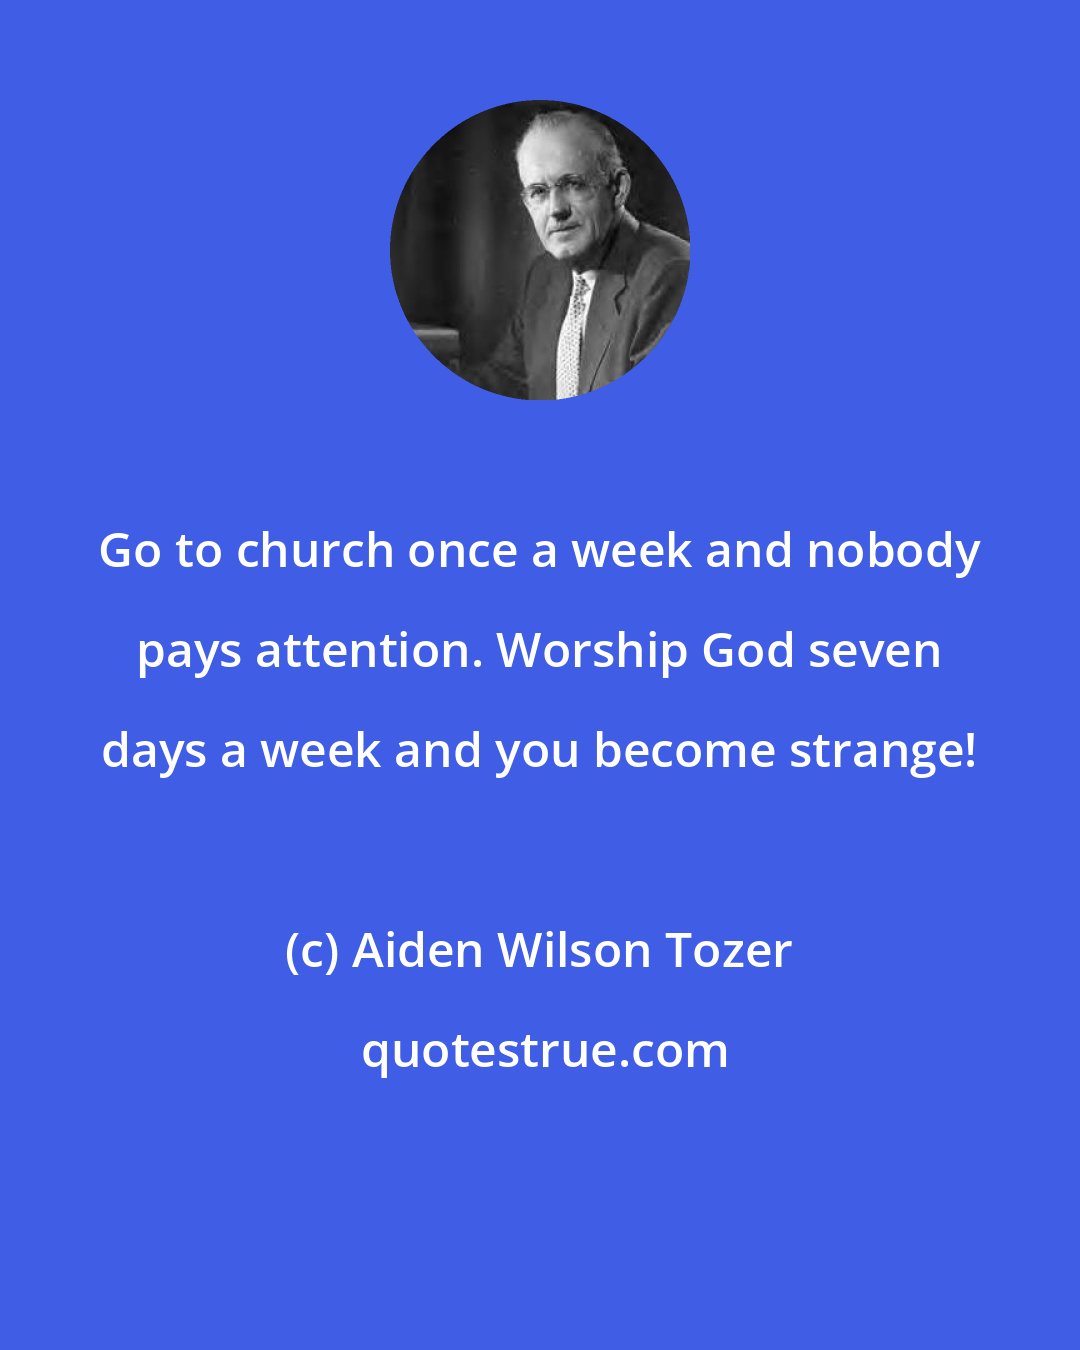 Aiden Wilson Tozer: Go to church once a week and nobody pays attention. Worship God seven days a week and you become strange!